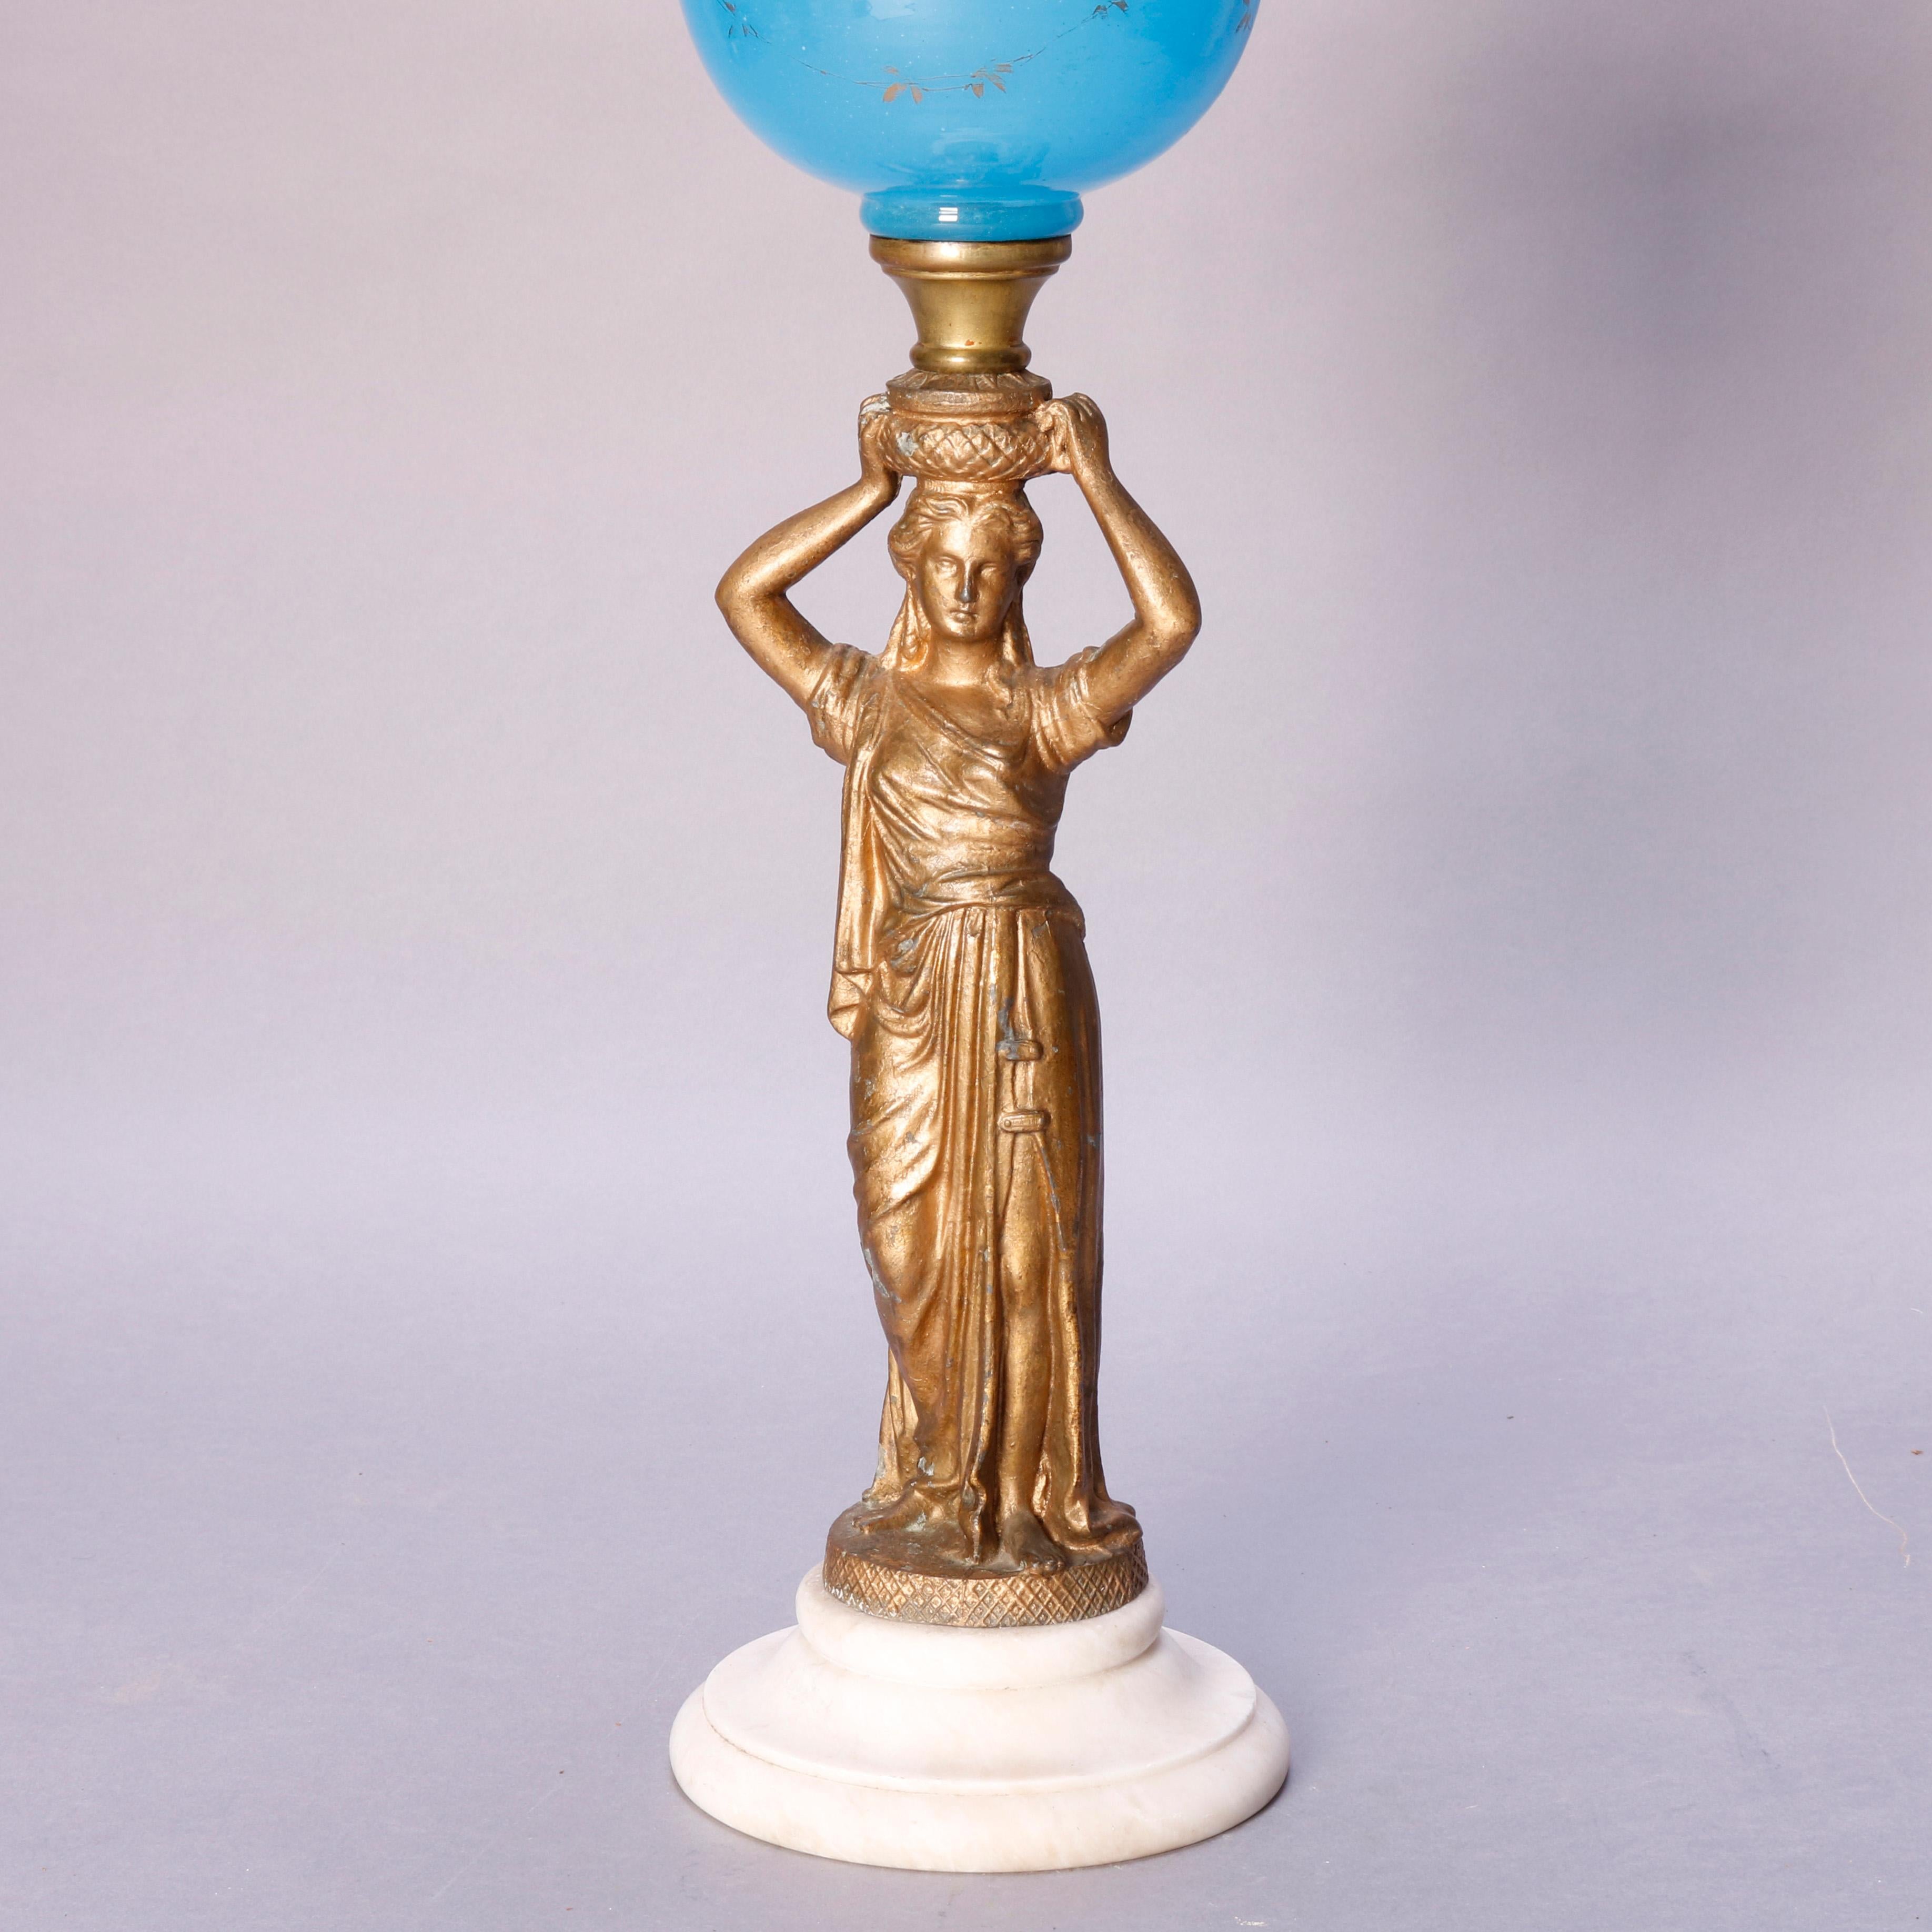 French Antique Figural Bronze Gone with the Wind Gilt Art Glass Oil Lamp, circa 1890